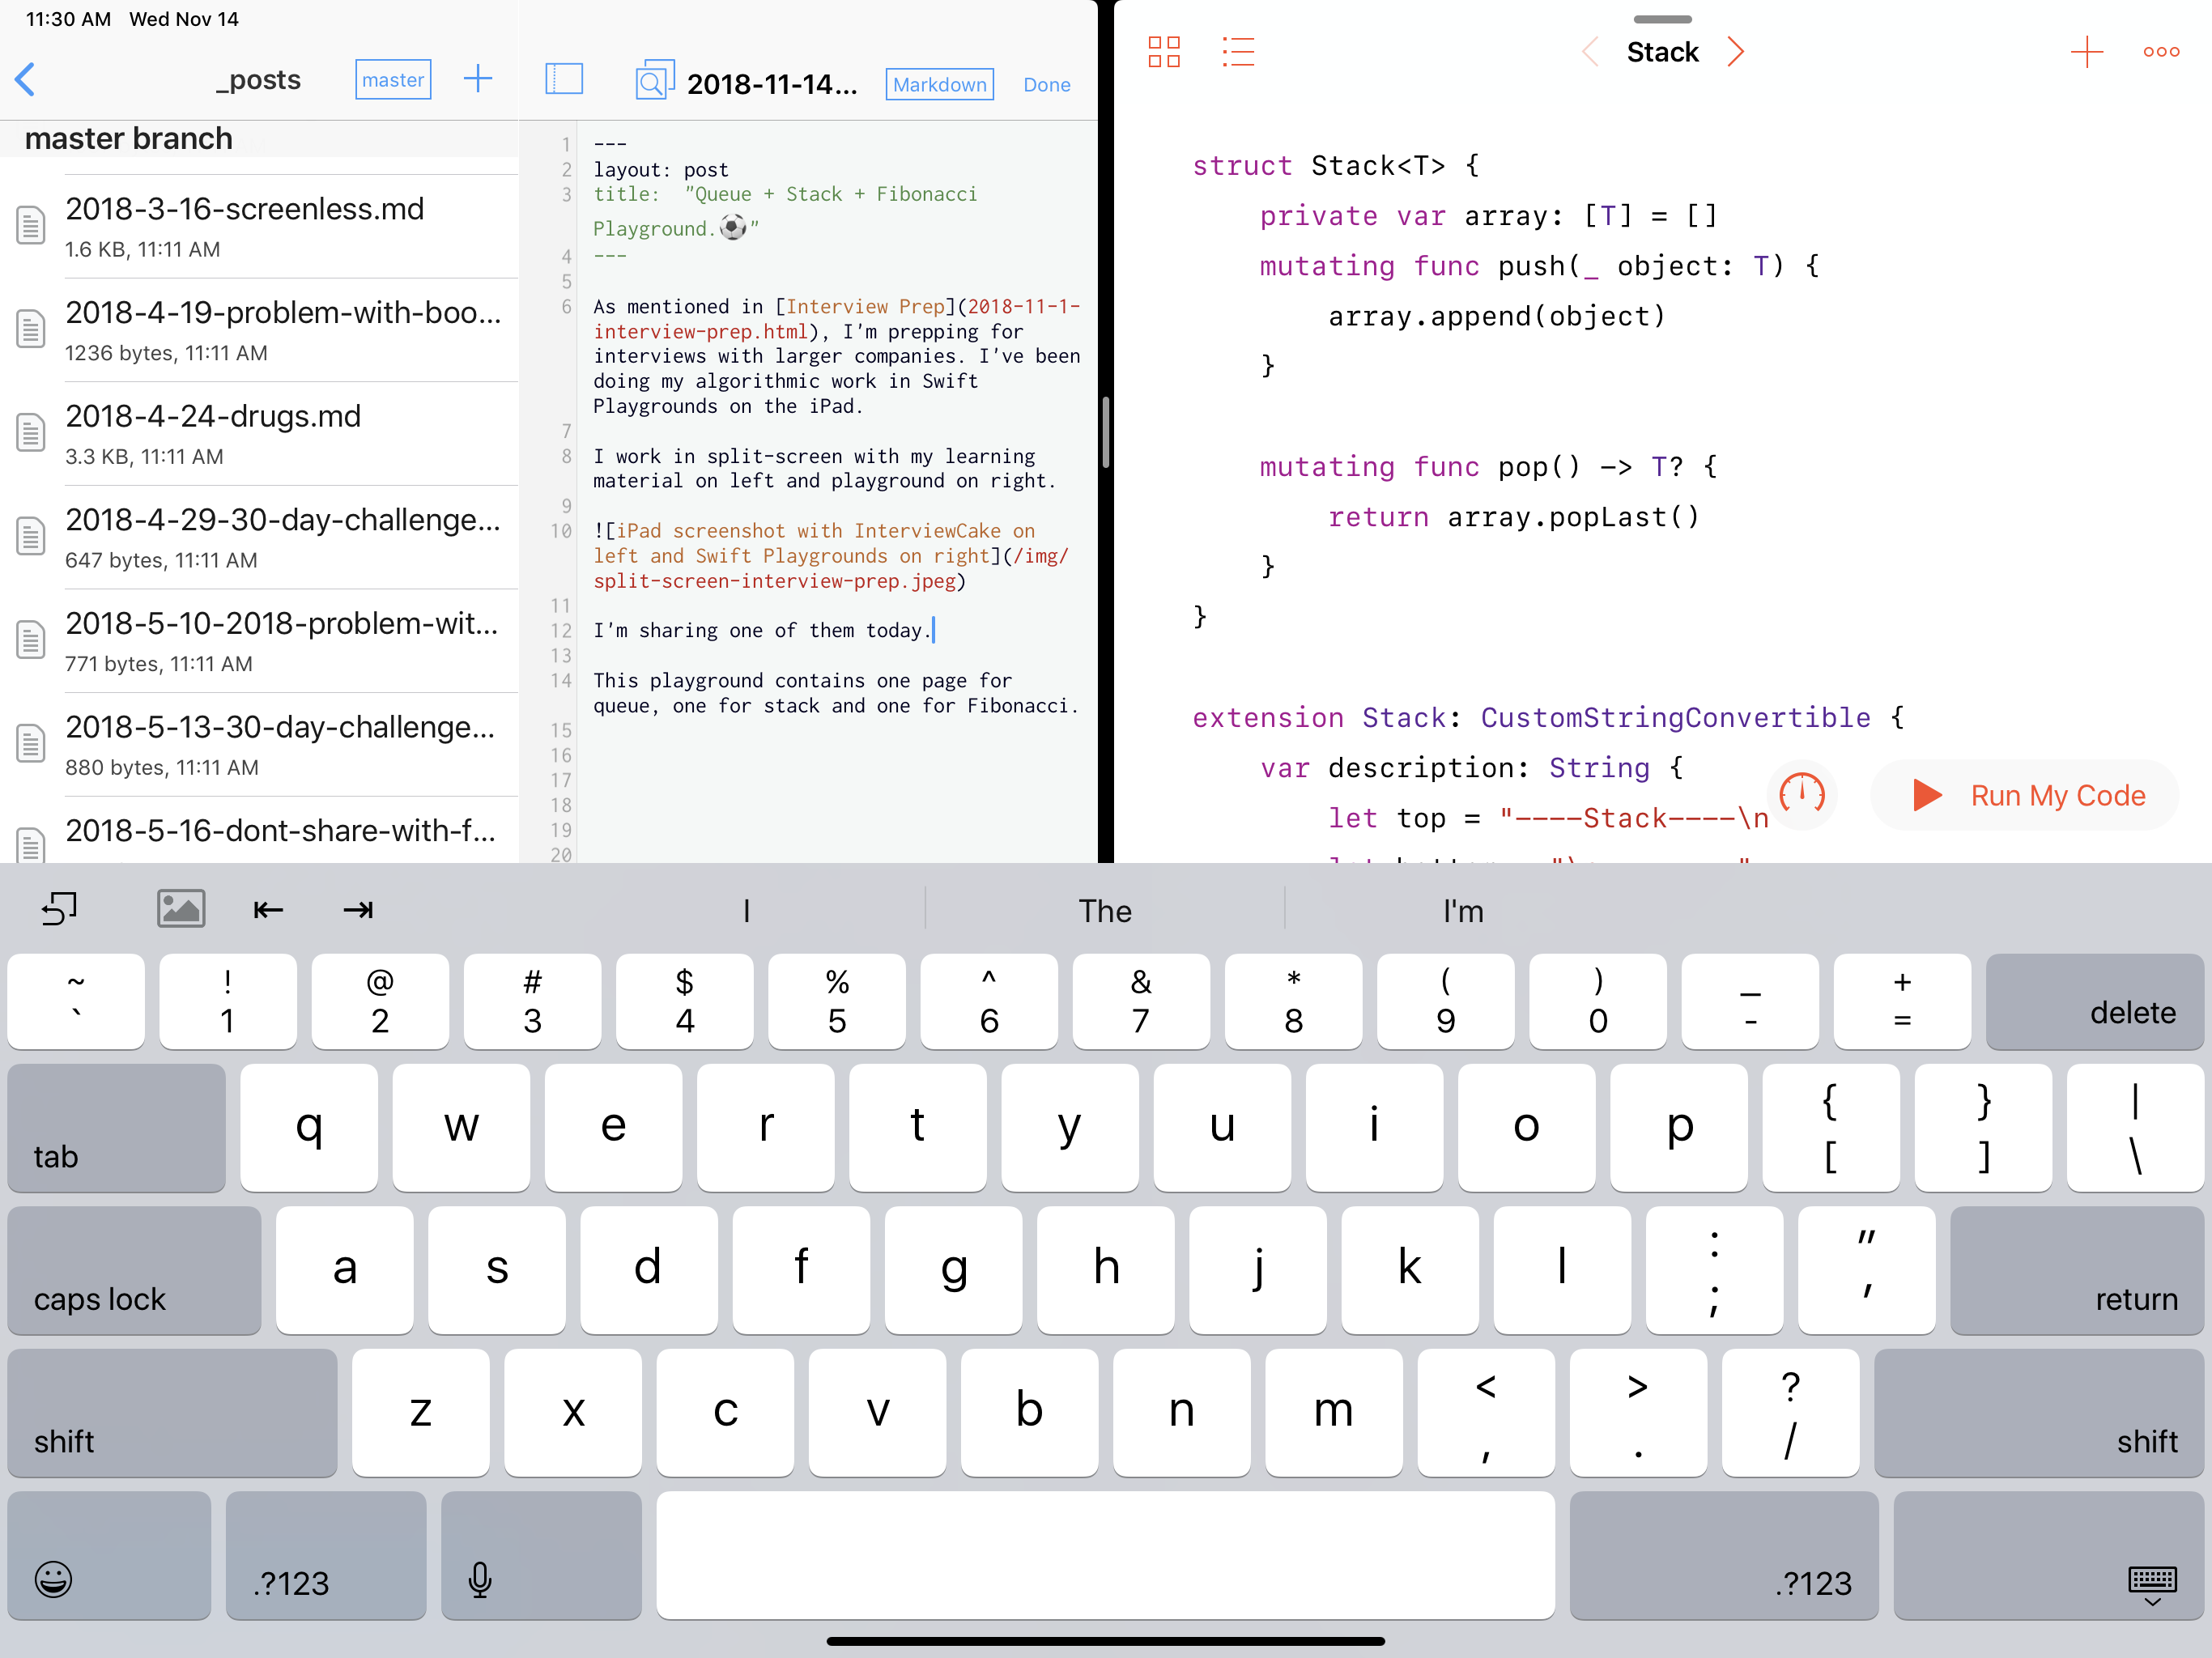 iPad screenshot with Working Copy on left and Swift Playgrounds on right